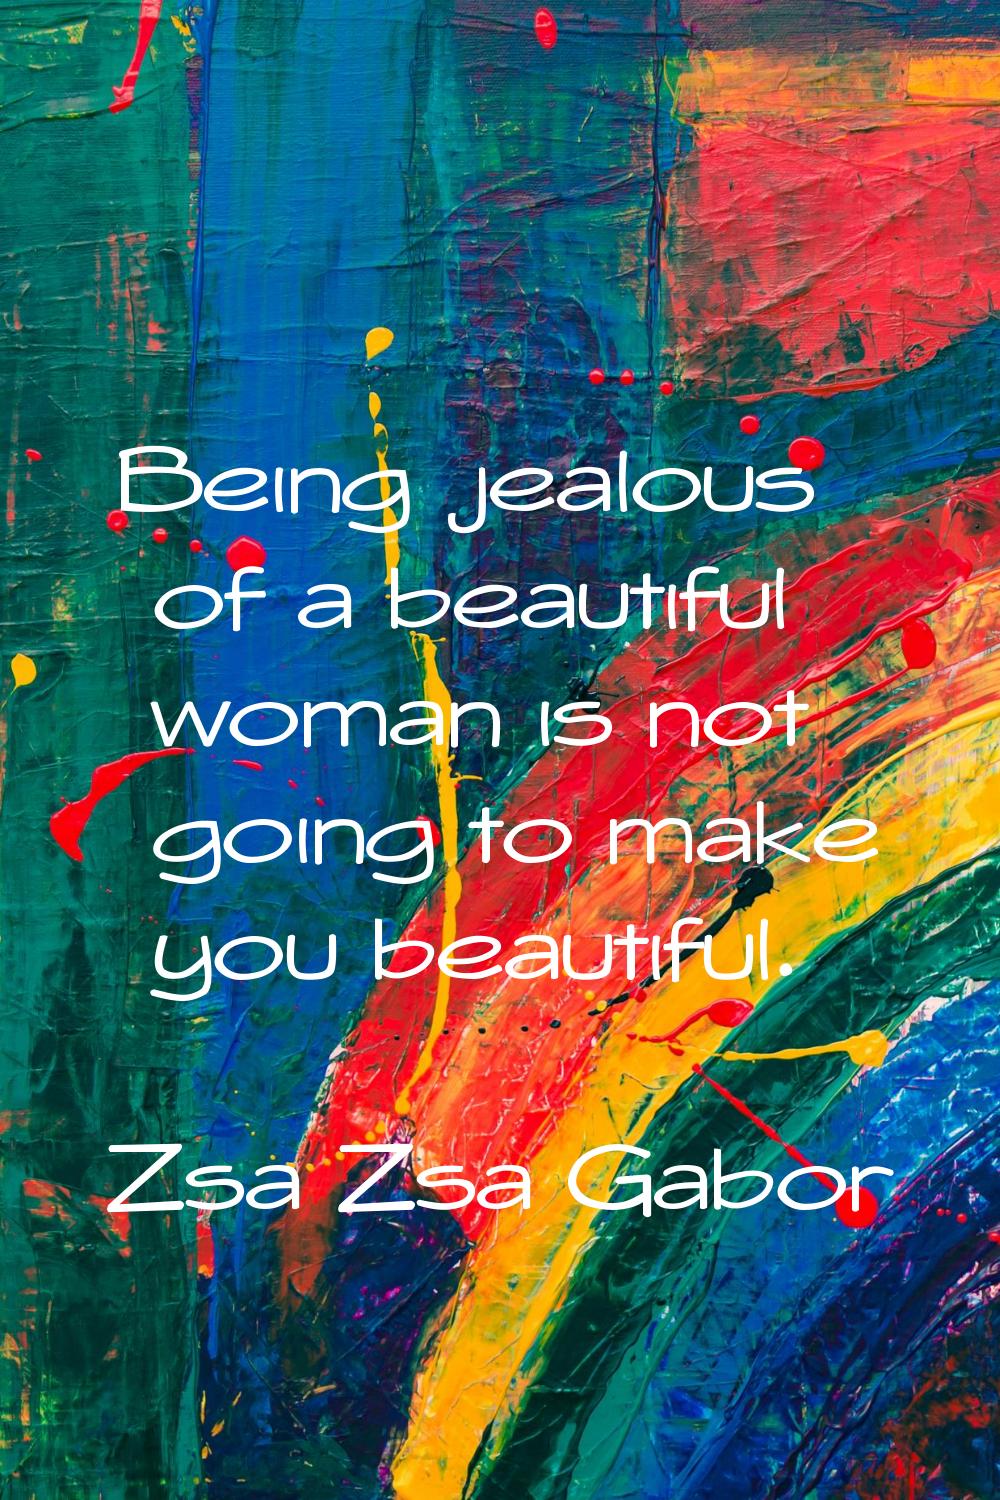 Being jealous of a beautiful woman is not going to make you beautiful.